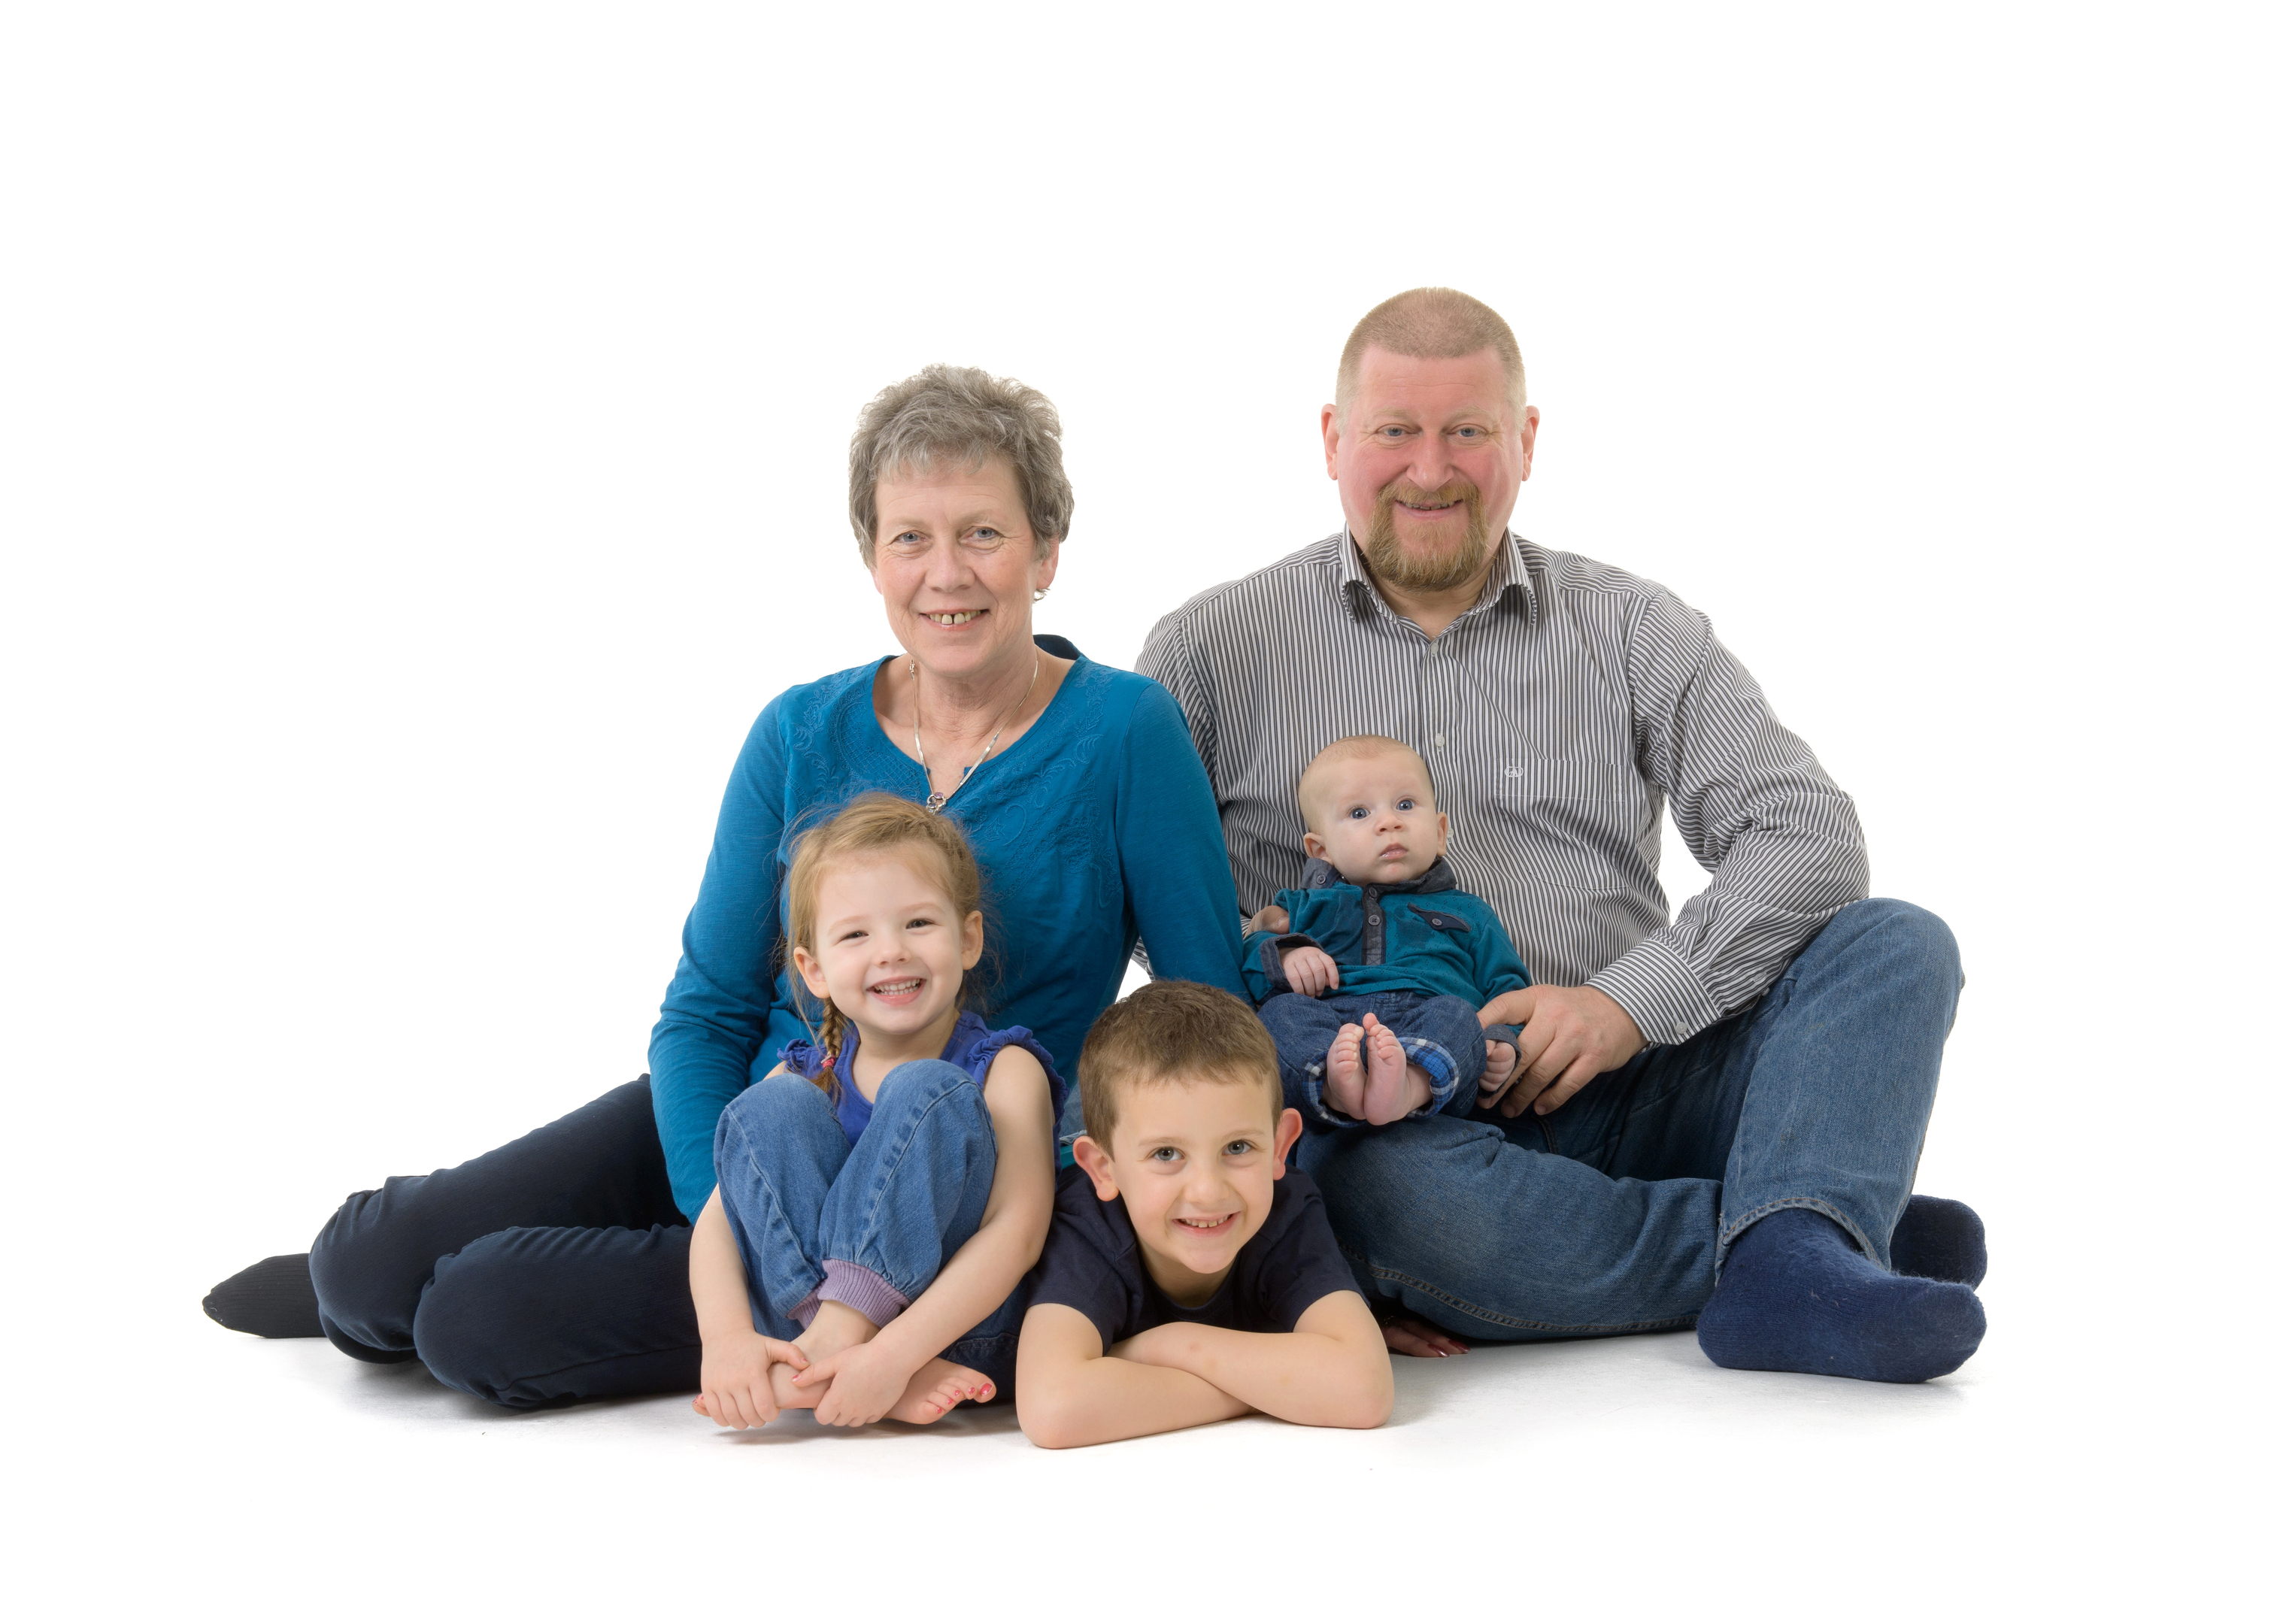 Joanna Strathdee and husband Mike Lockheart, pictured with her grandchildren (L-R) Eiden, Caelin, and Travis.